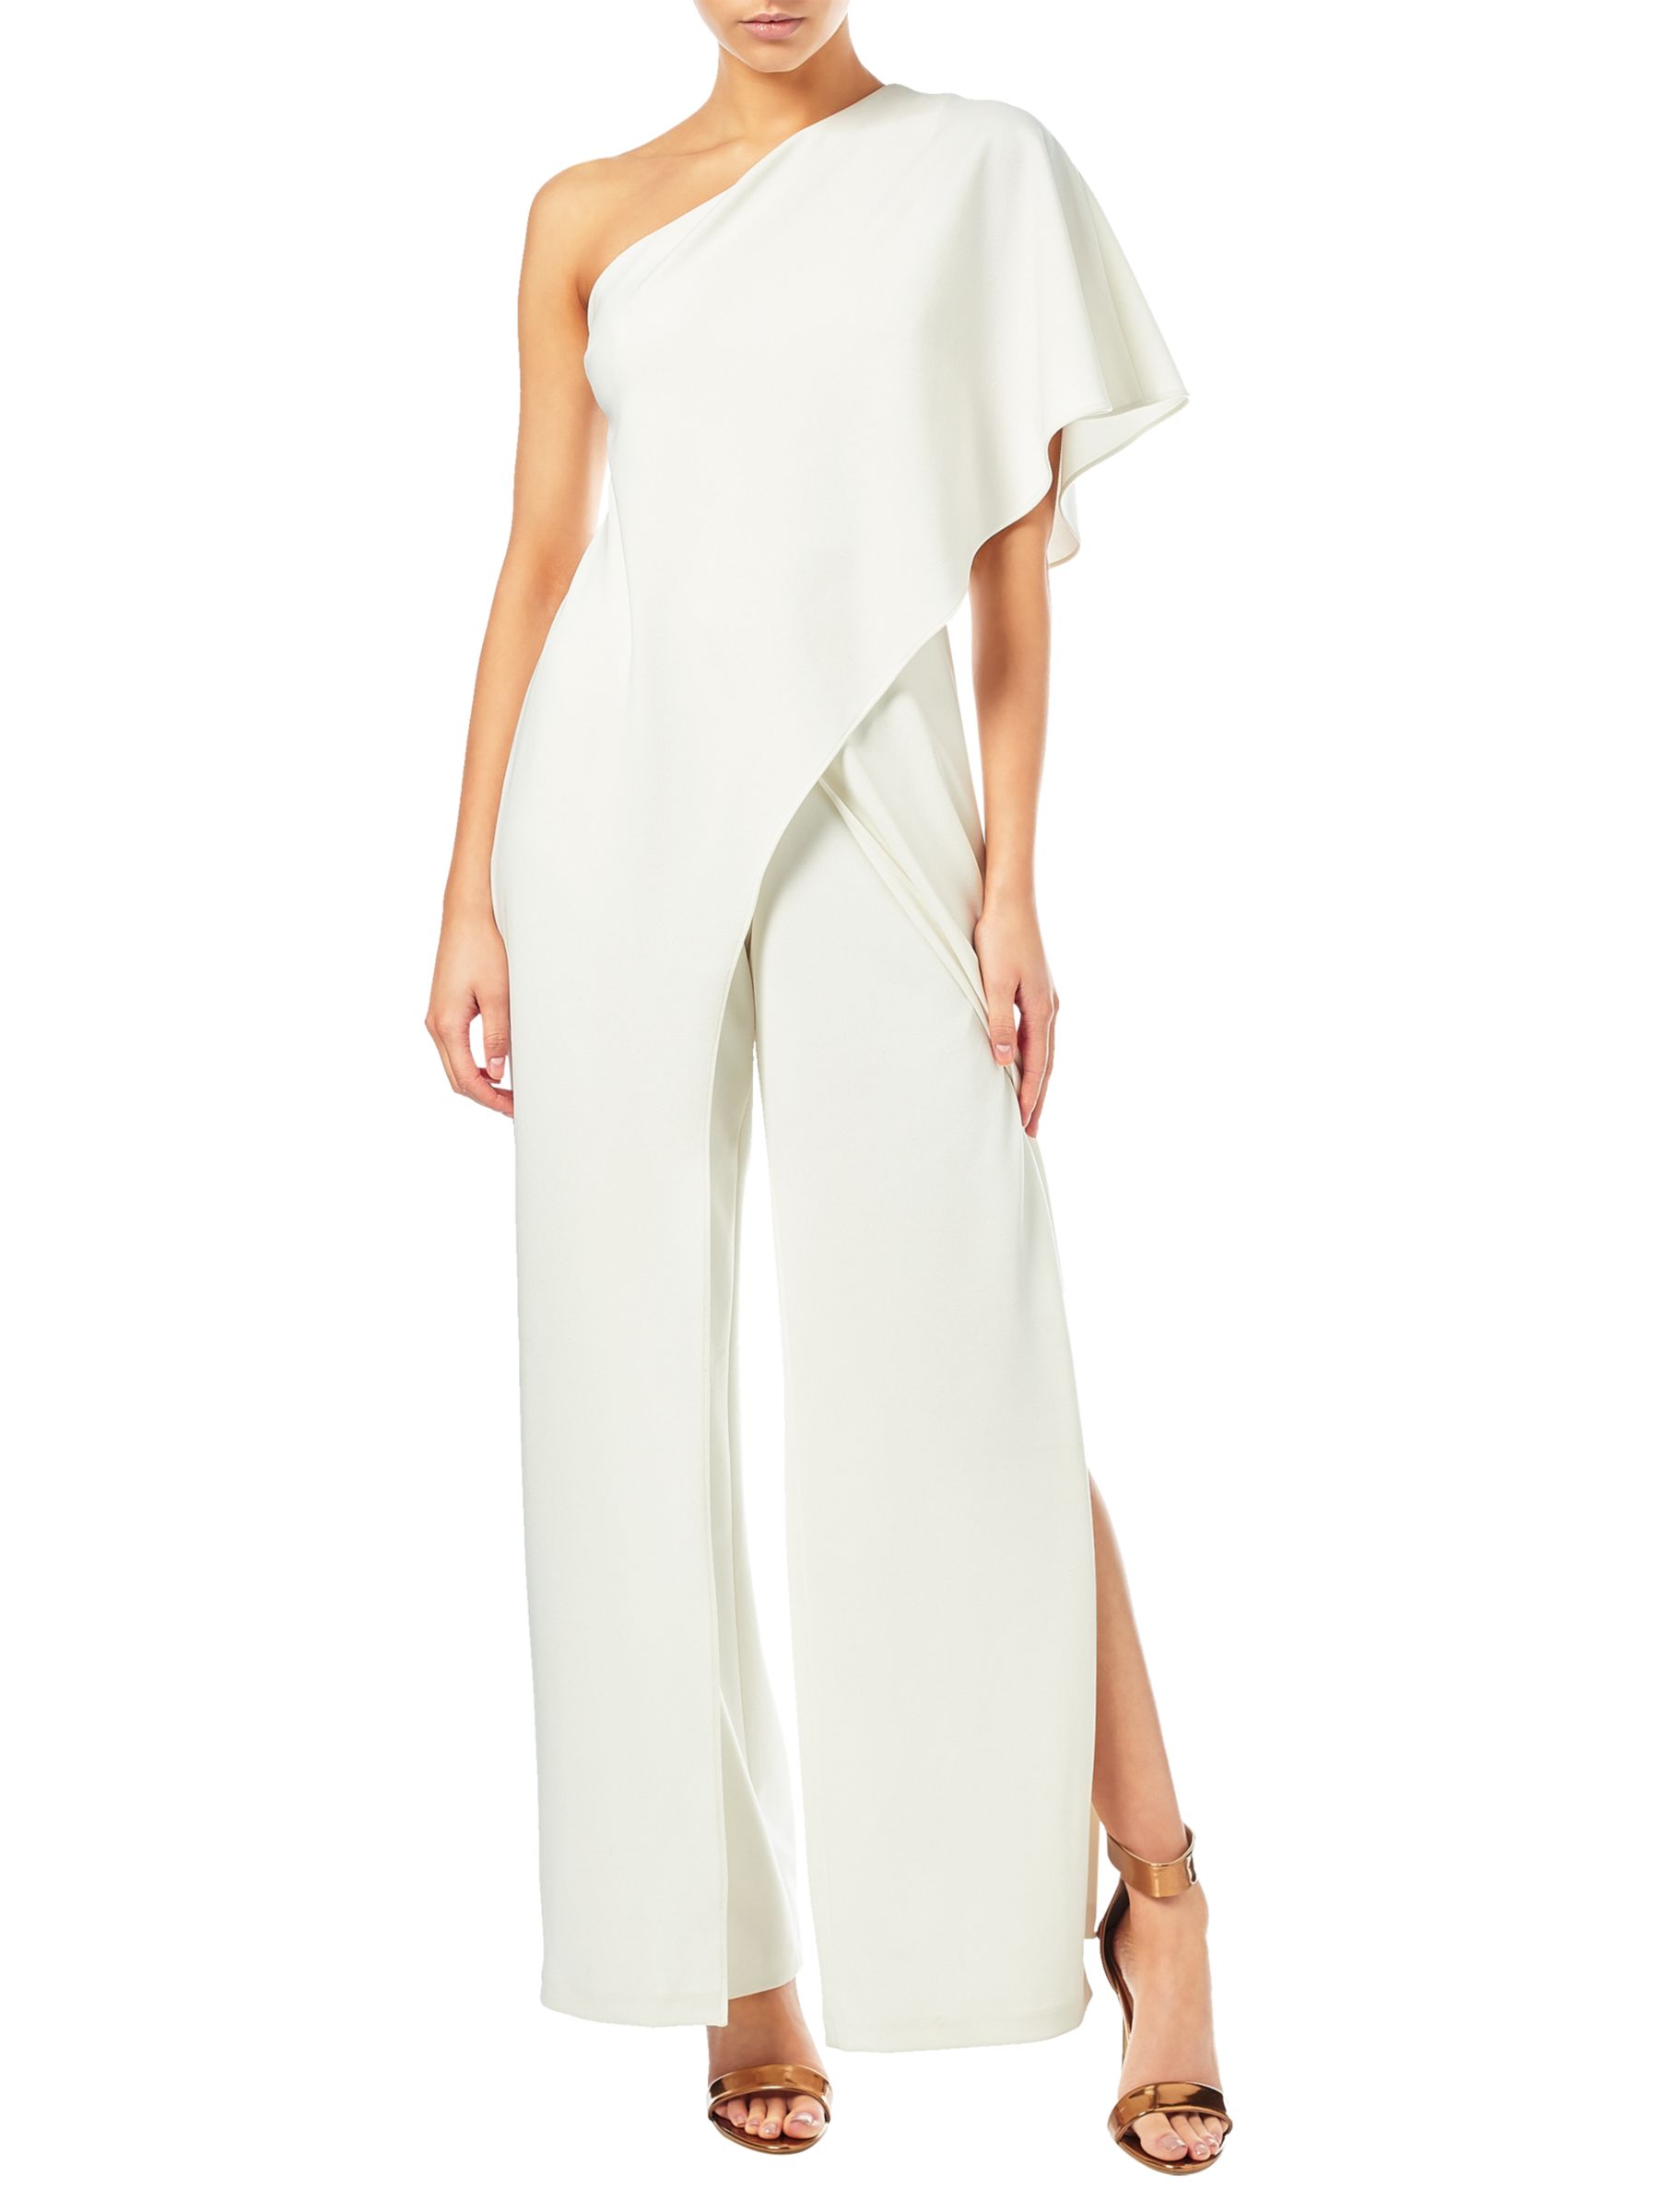 Adrianna Papell One Shoulder Jumpsuit at John Lewis & Partners